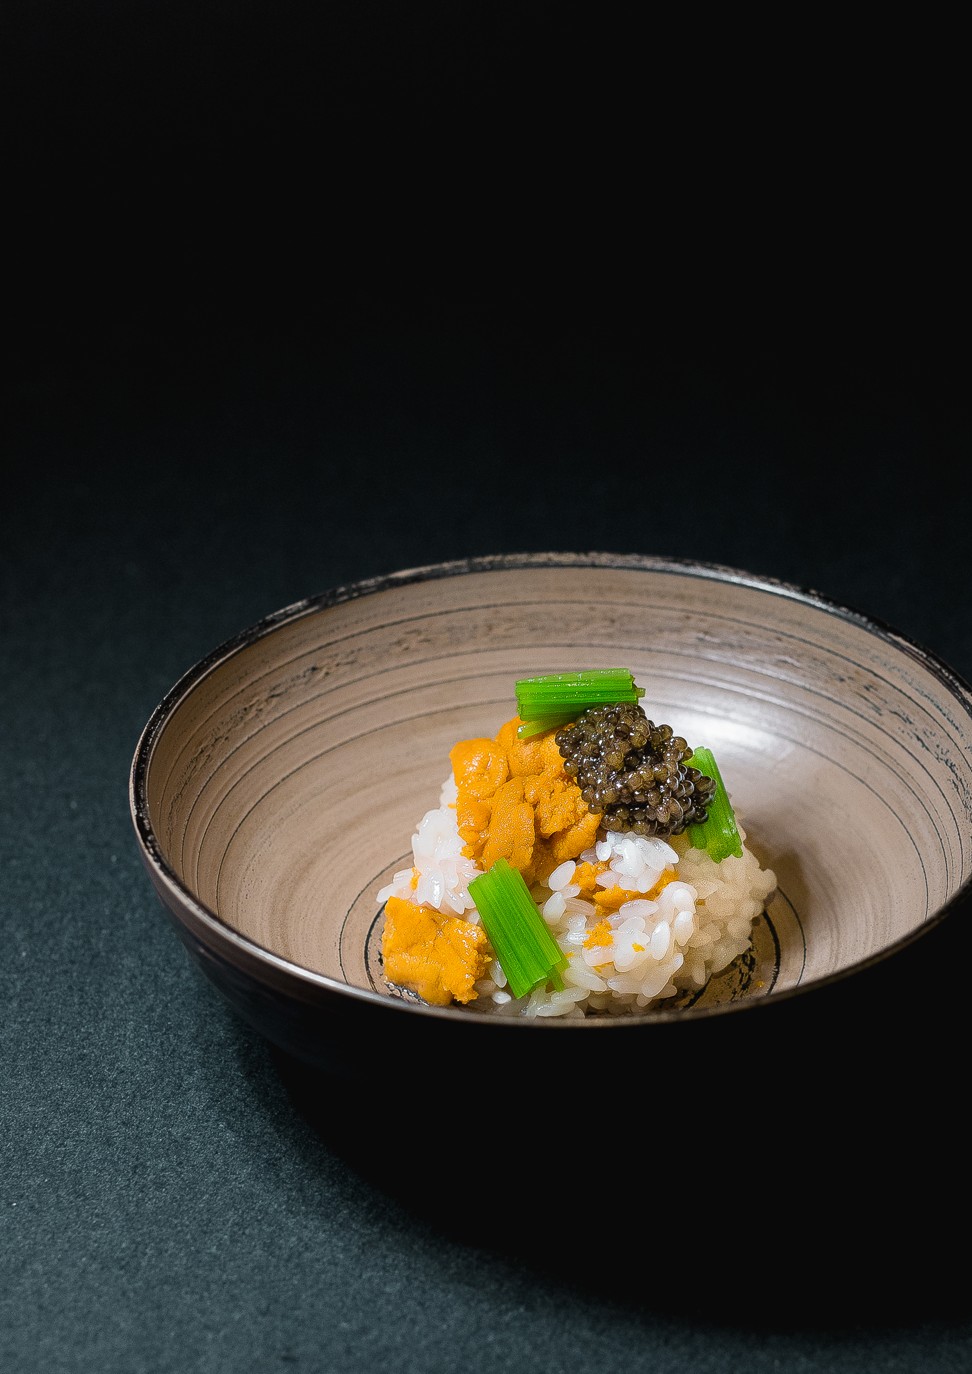 A caviar dish created by Kashiwaya Hong Kong, which is teaming up with caviar house Kaviari to serve an 11-course menu for one night only, on August 16.